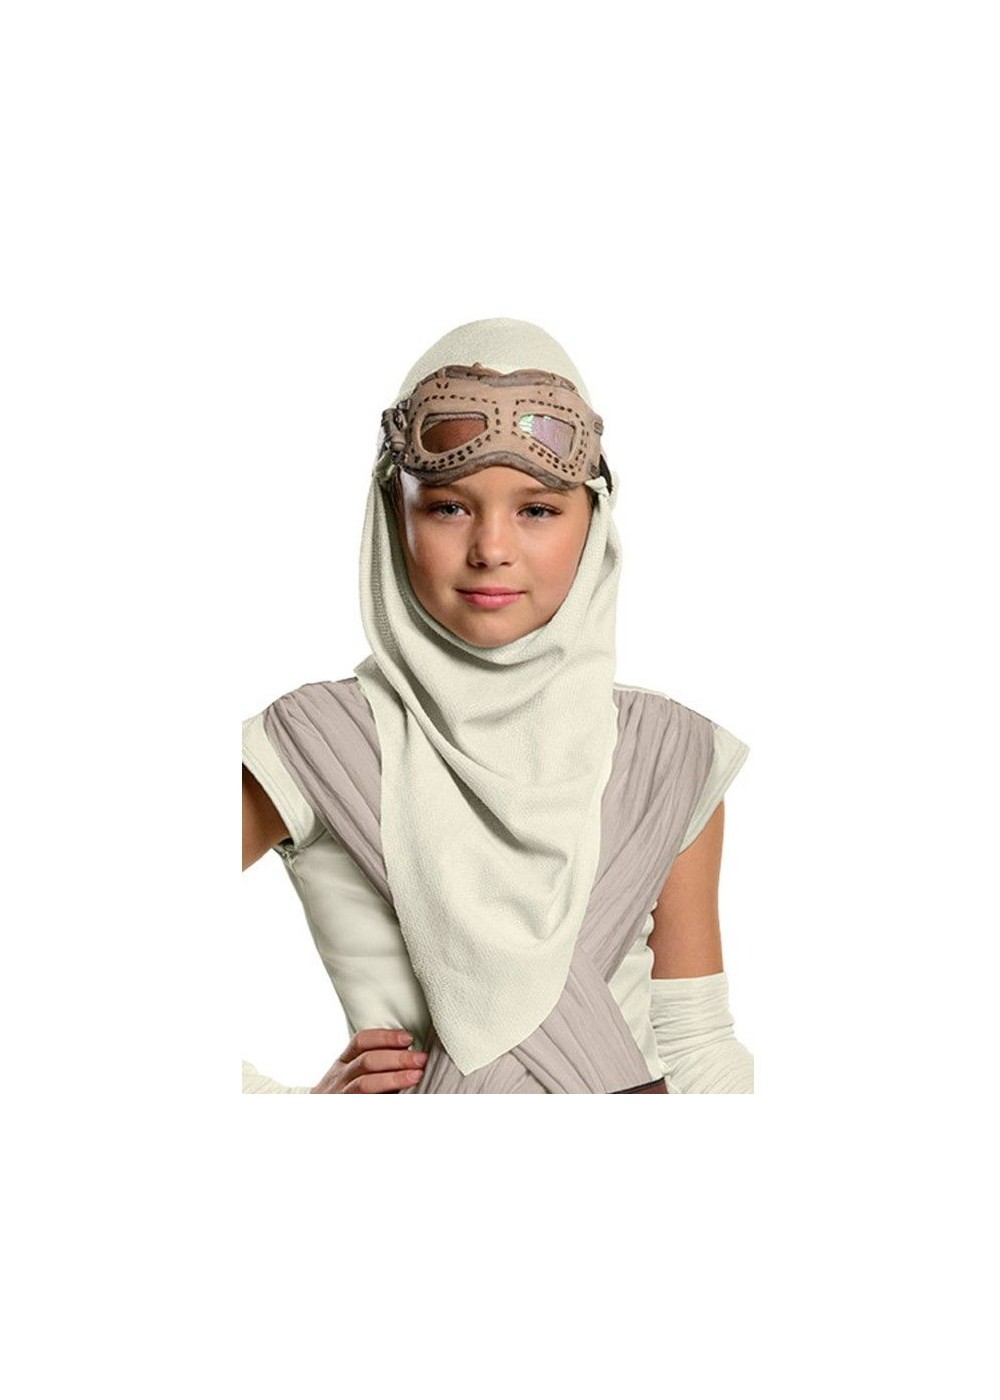 Star Wars Rey Mask With Hood Kids Costume Accessory